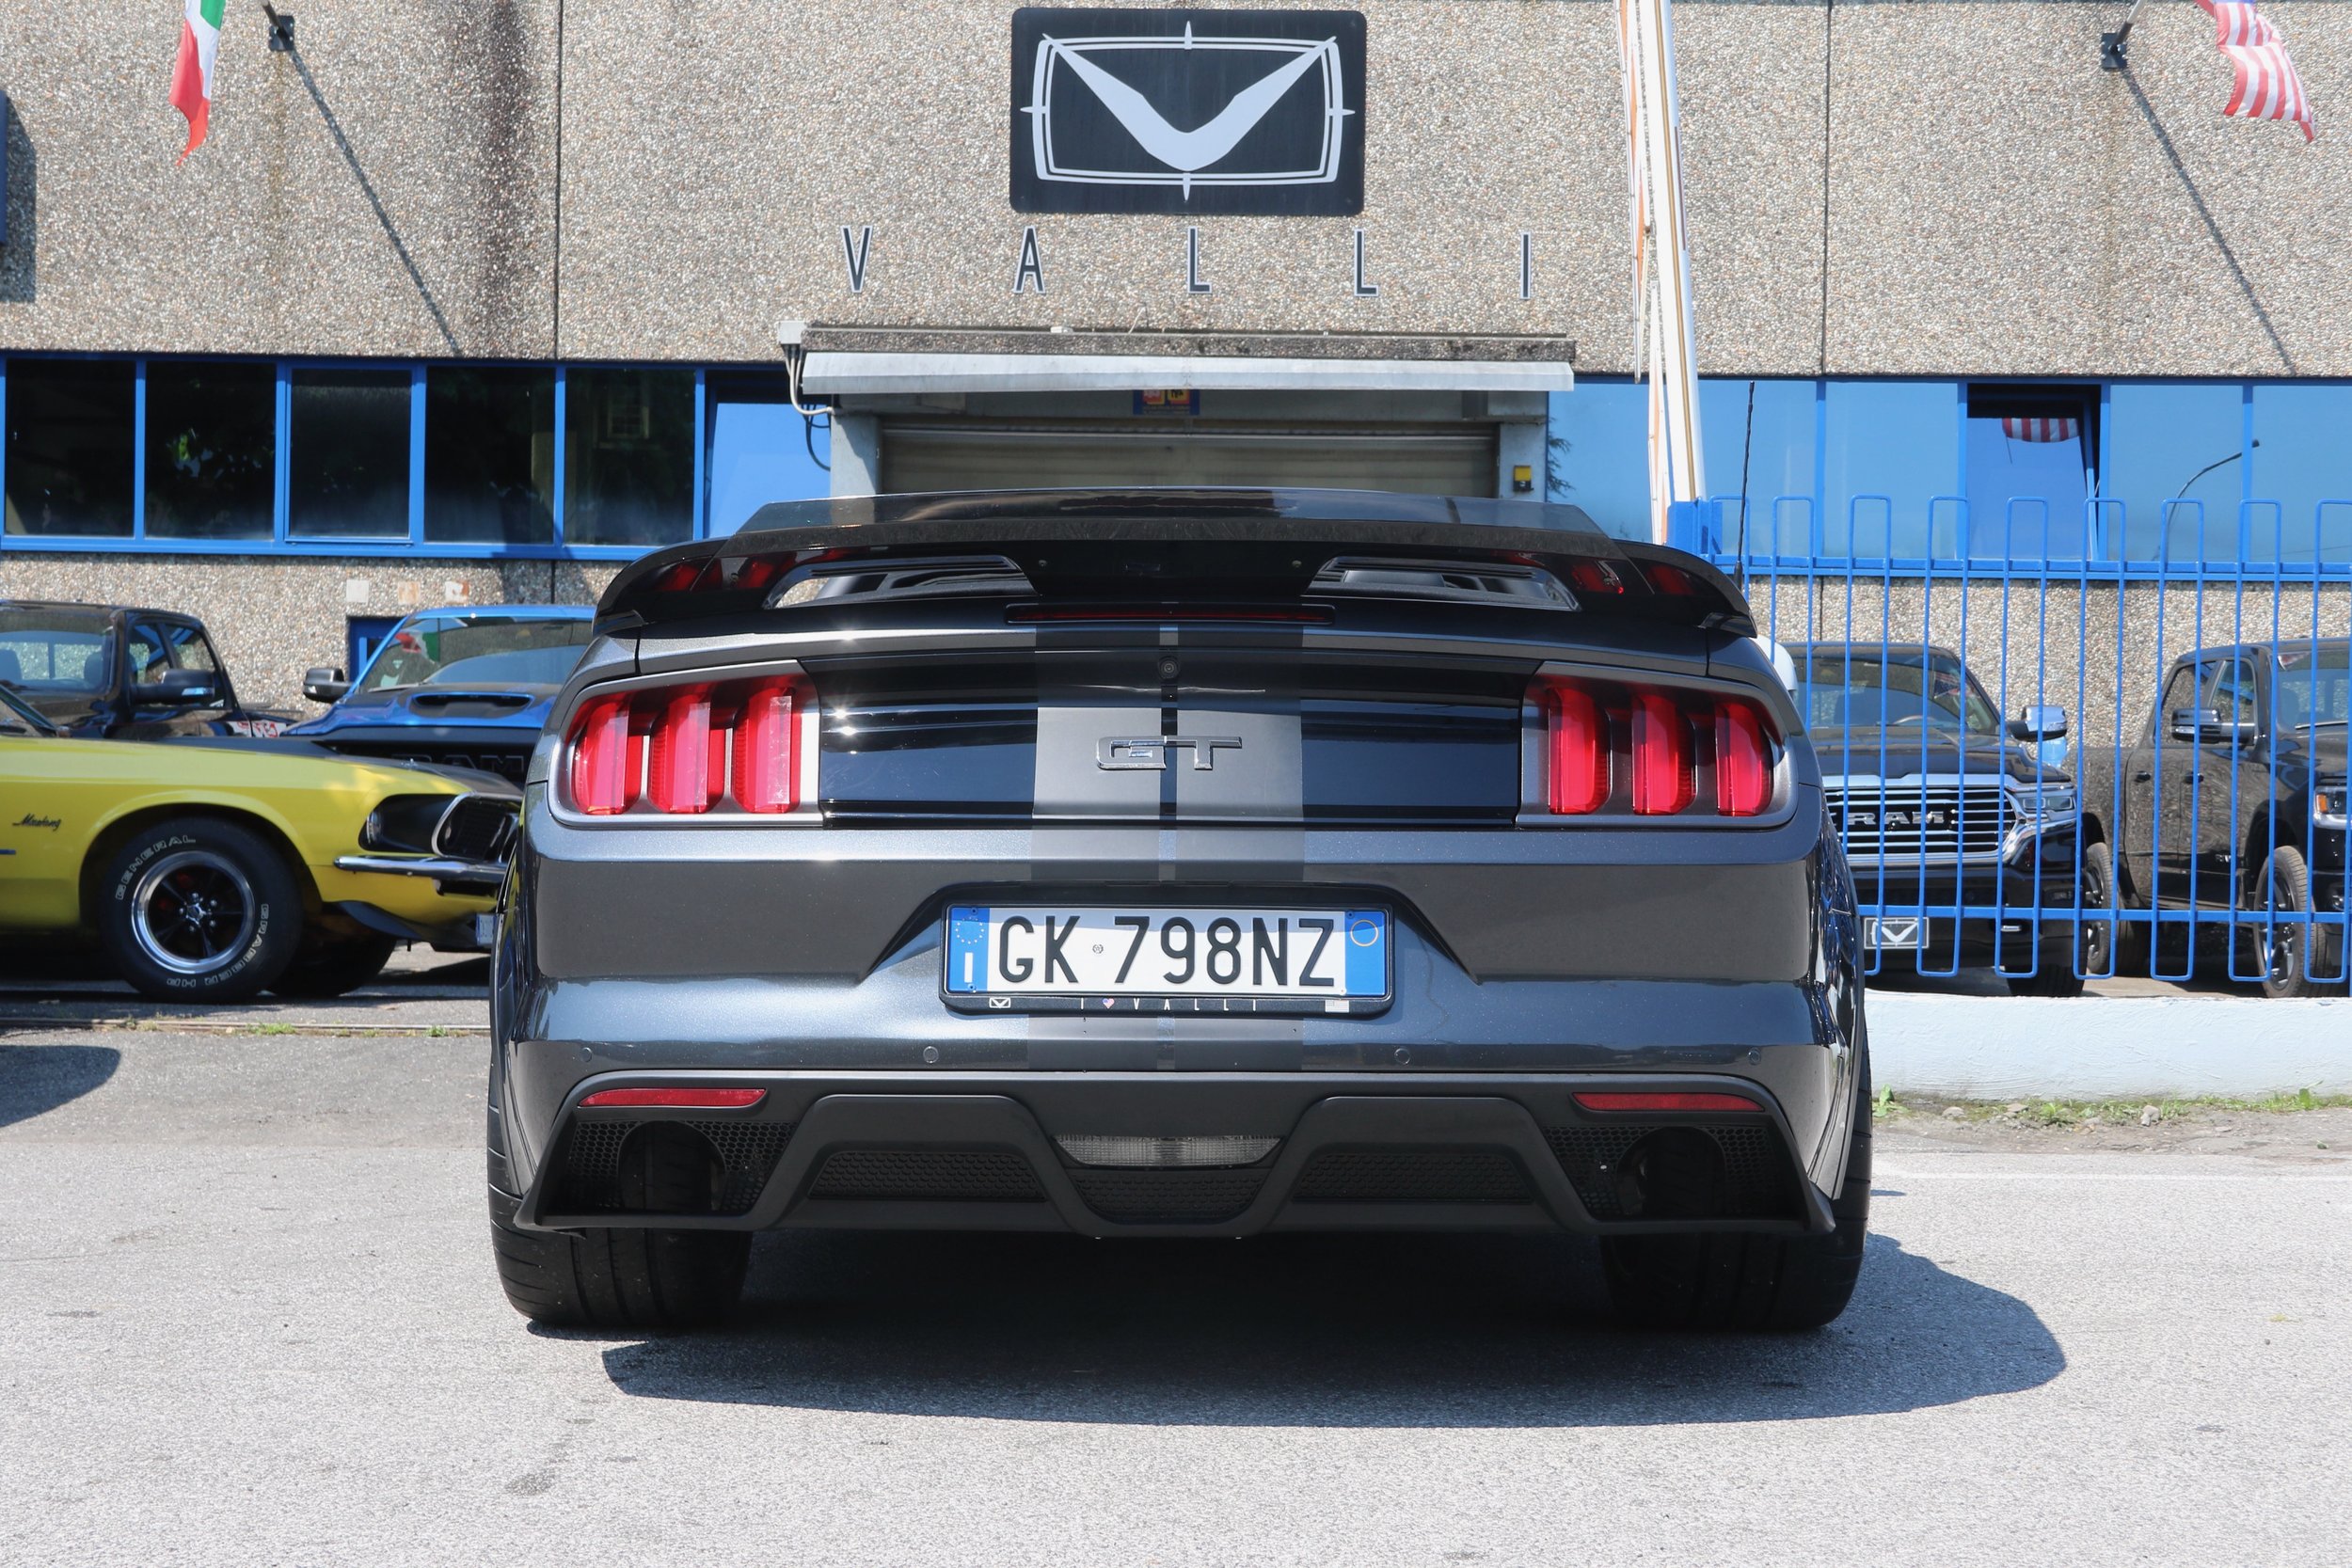 06 2015 Mustang GT 5.0L Coyote Convertible Marco Vignale.jpeg